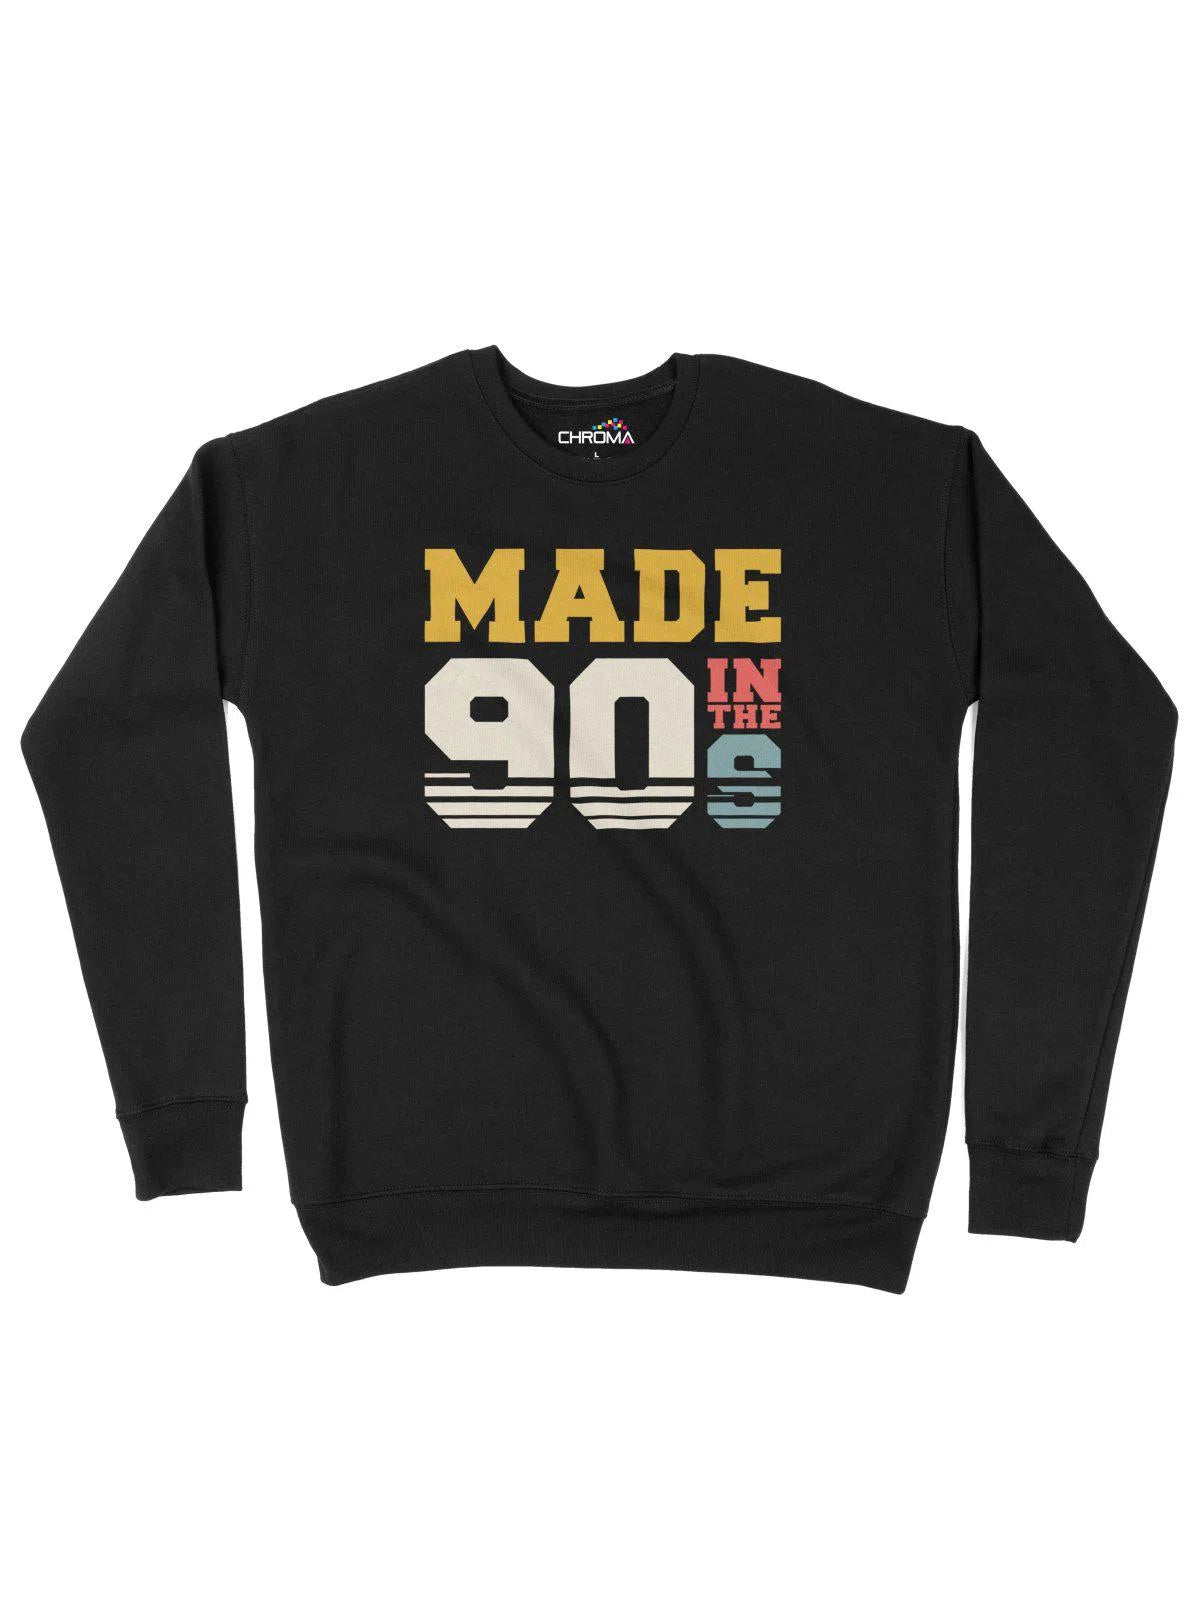 All our designs are printed on the highest quality garments and use professional quality DTF printing technology producing a soft, well fitted long lasting product tAdult SweatshirtMade In The 90's Retro Unisex Adult SweatshirtChroma Clothing